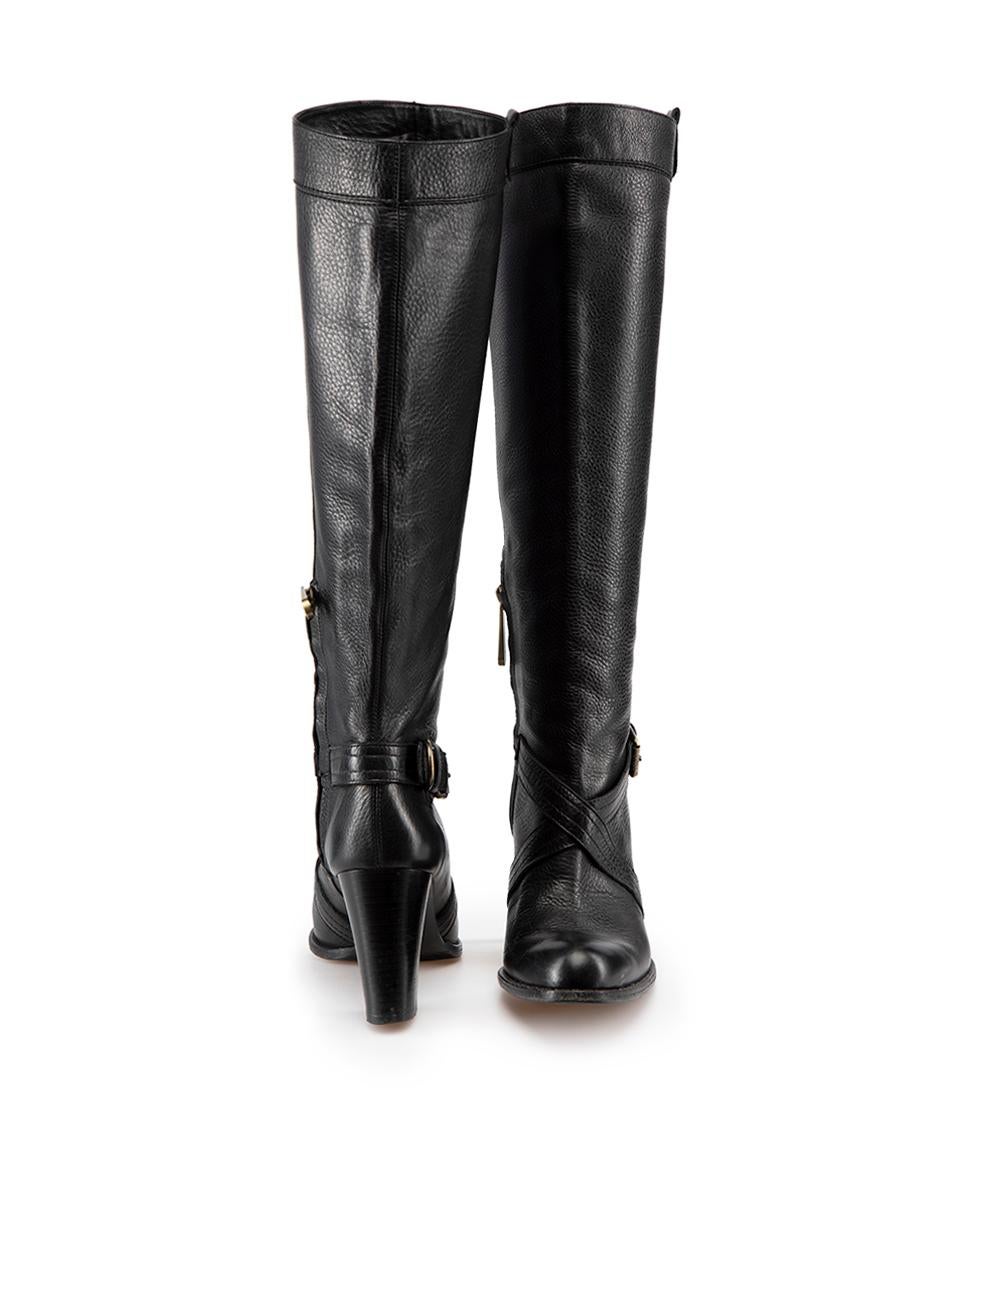 Bally Black Leather Buckle Knee High Boots Size EU 36.5 In Good Condition For Sale In London, GB